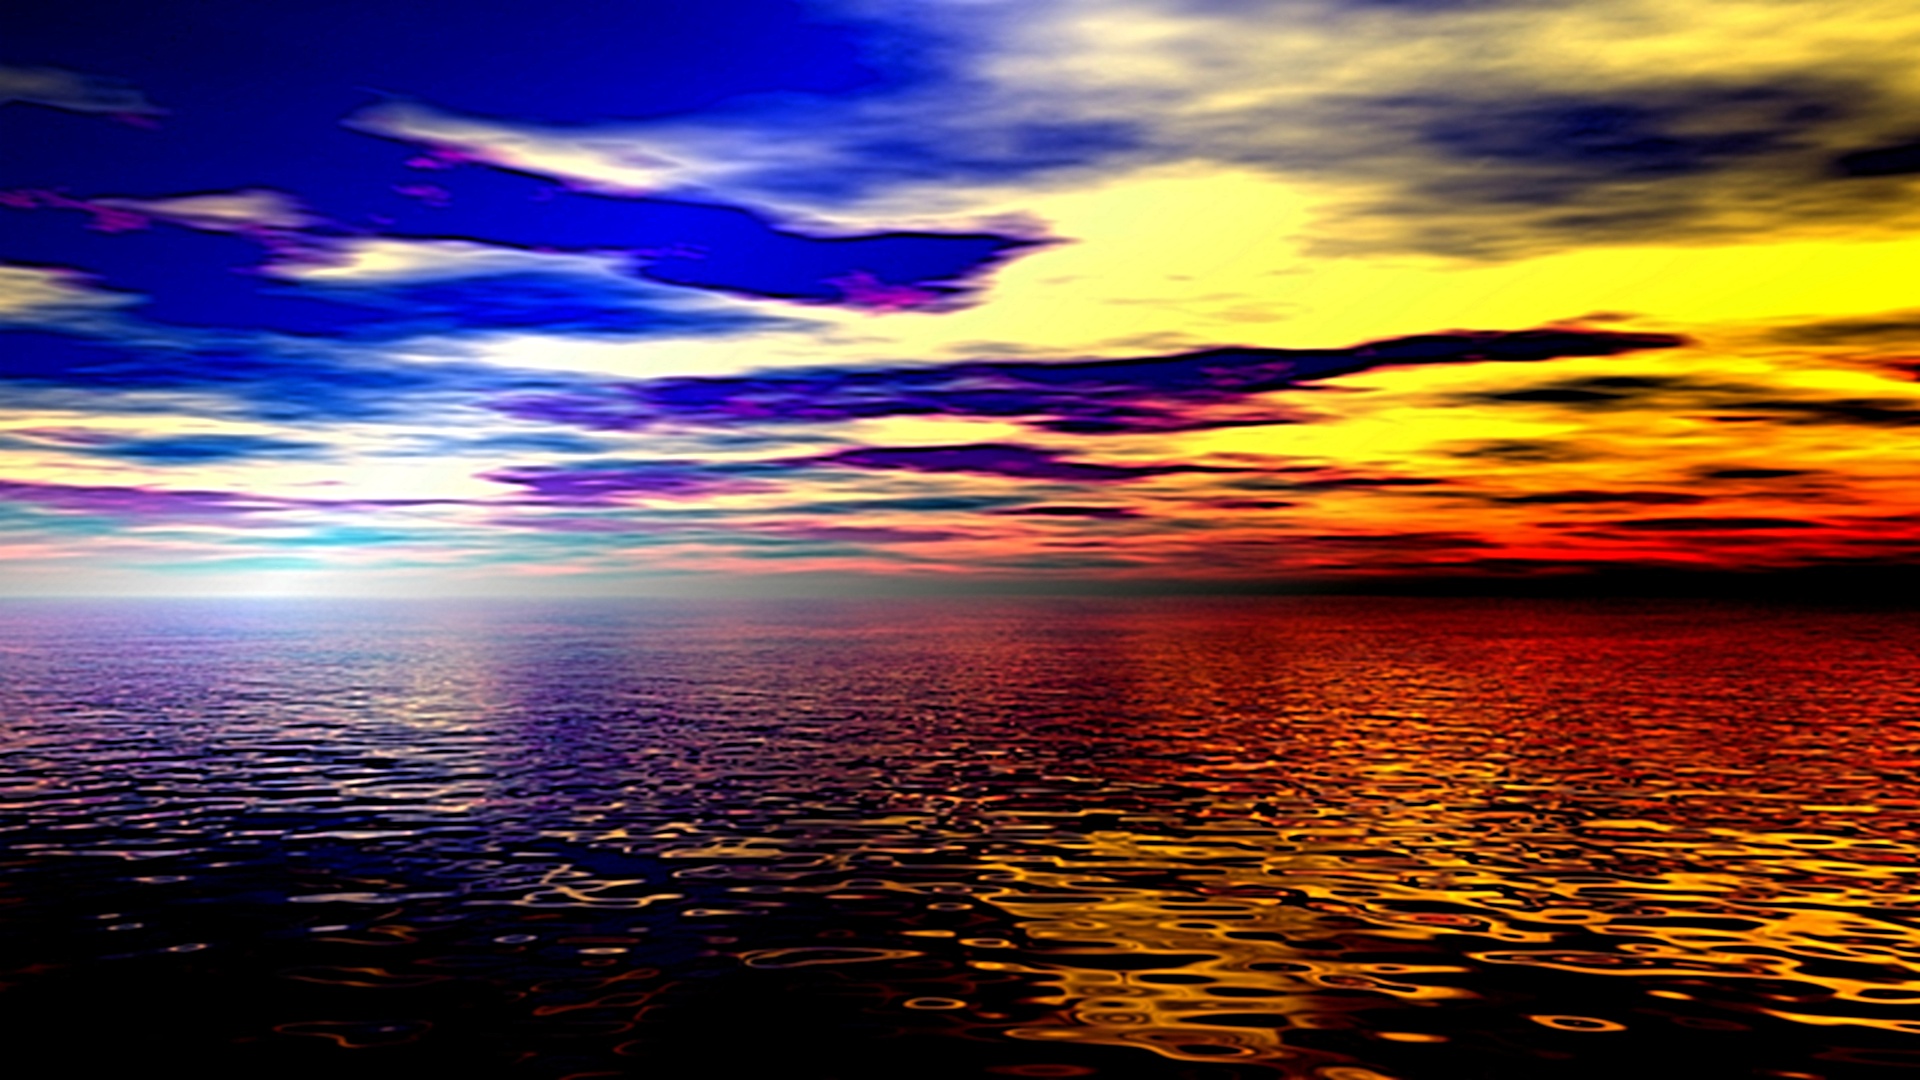 Cool Backgrounds Of Sunsets - 1920x1080 Wallpaper 